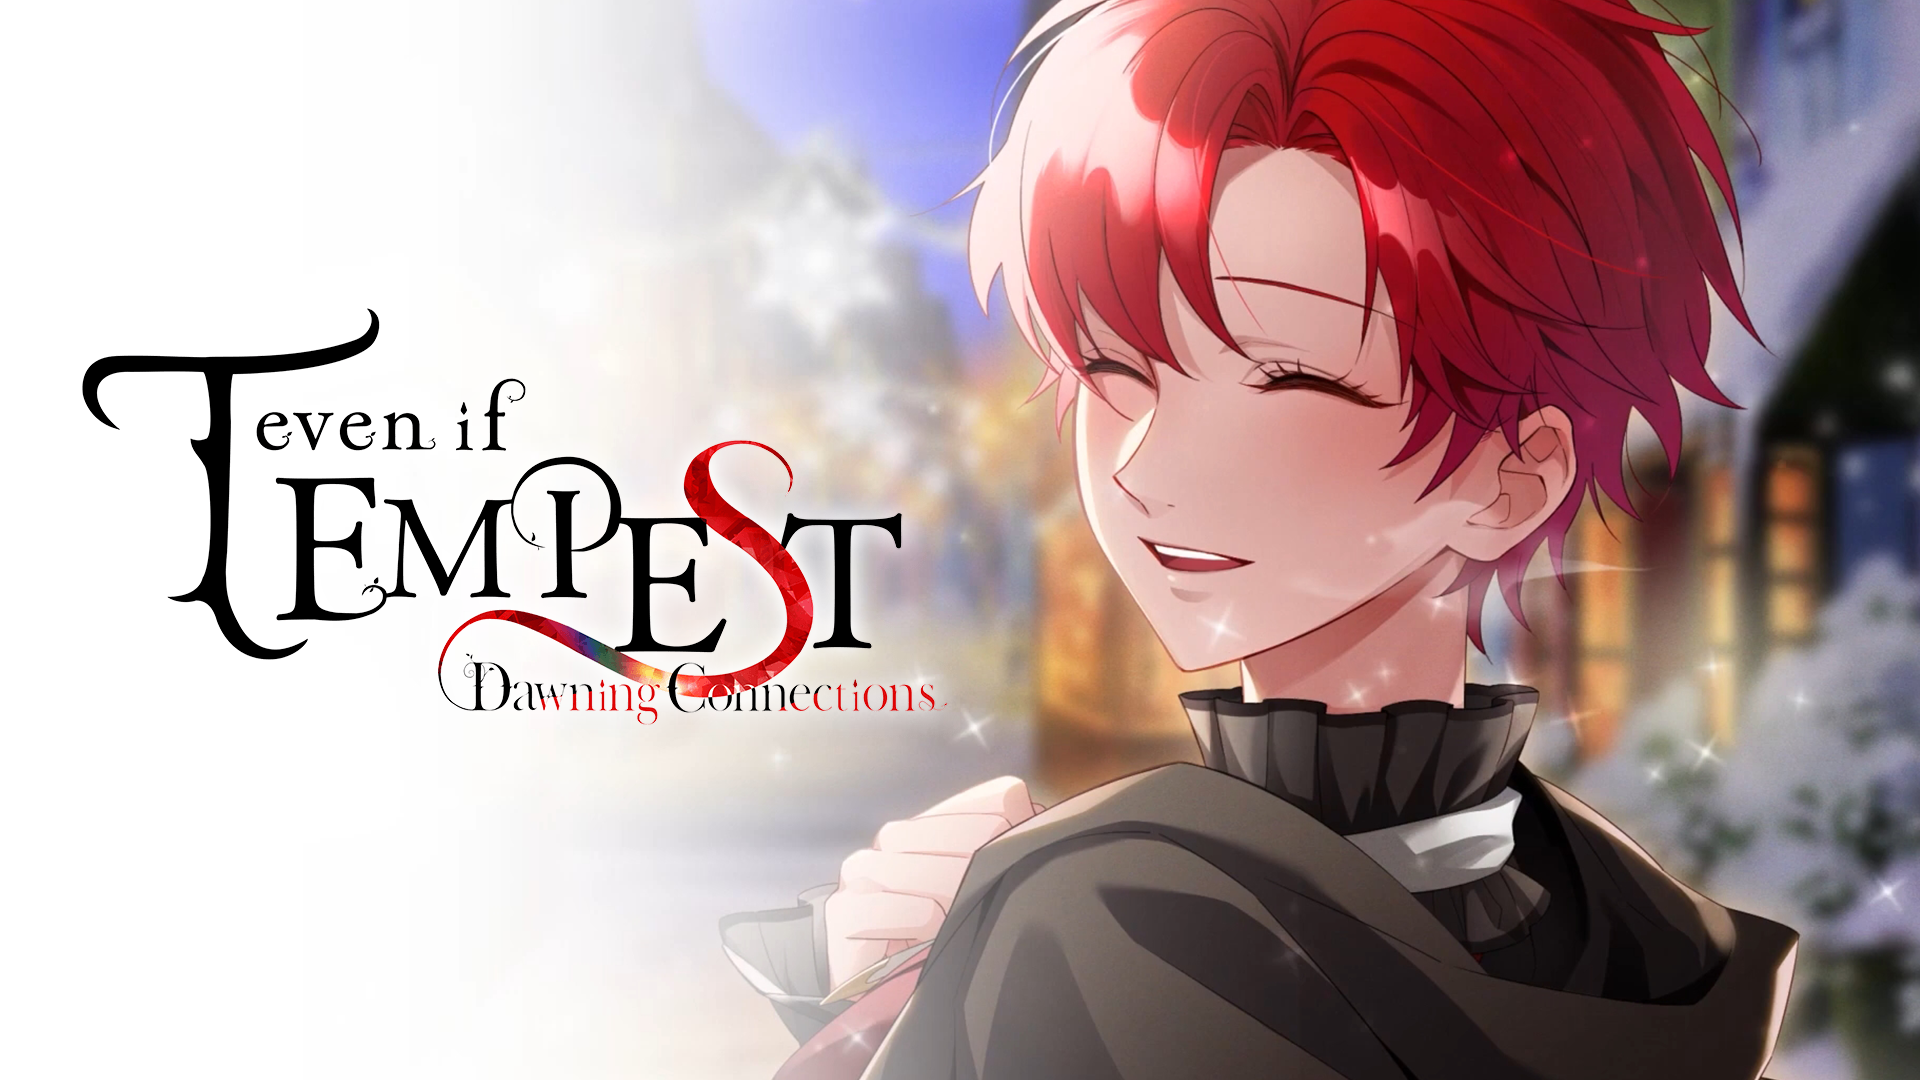 Otome Fandisk ‘Even if Tempest Dawning Connections Releases New Trailer Introducing Game Systems